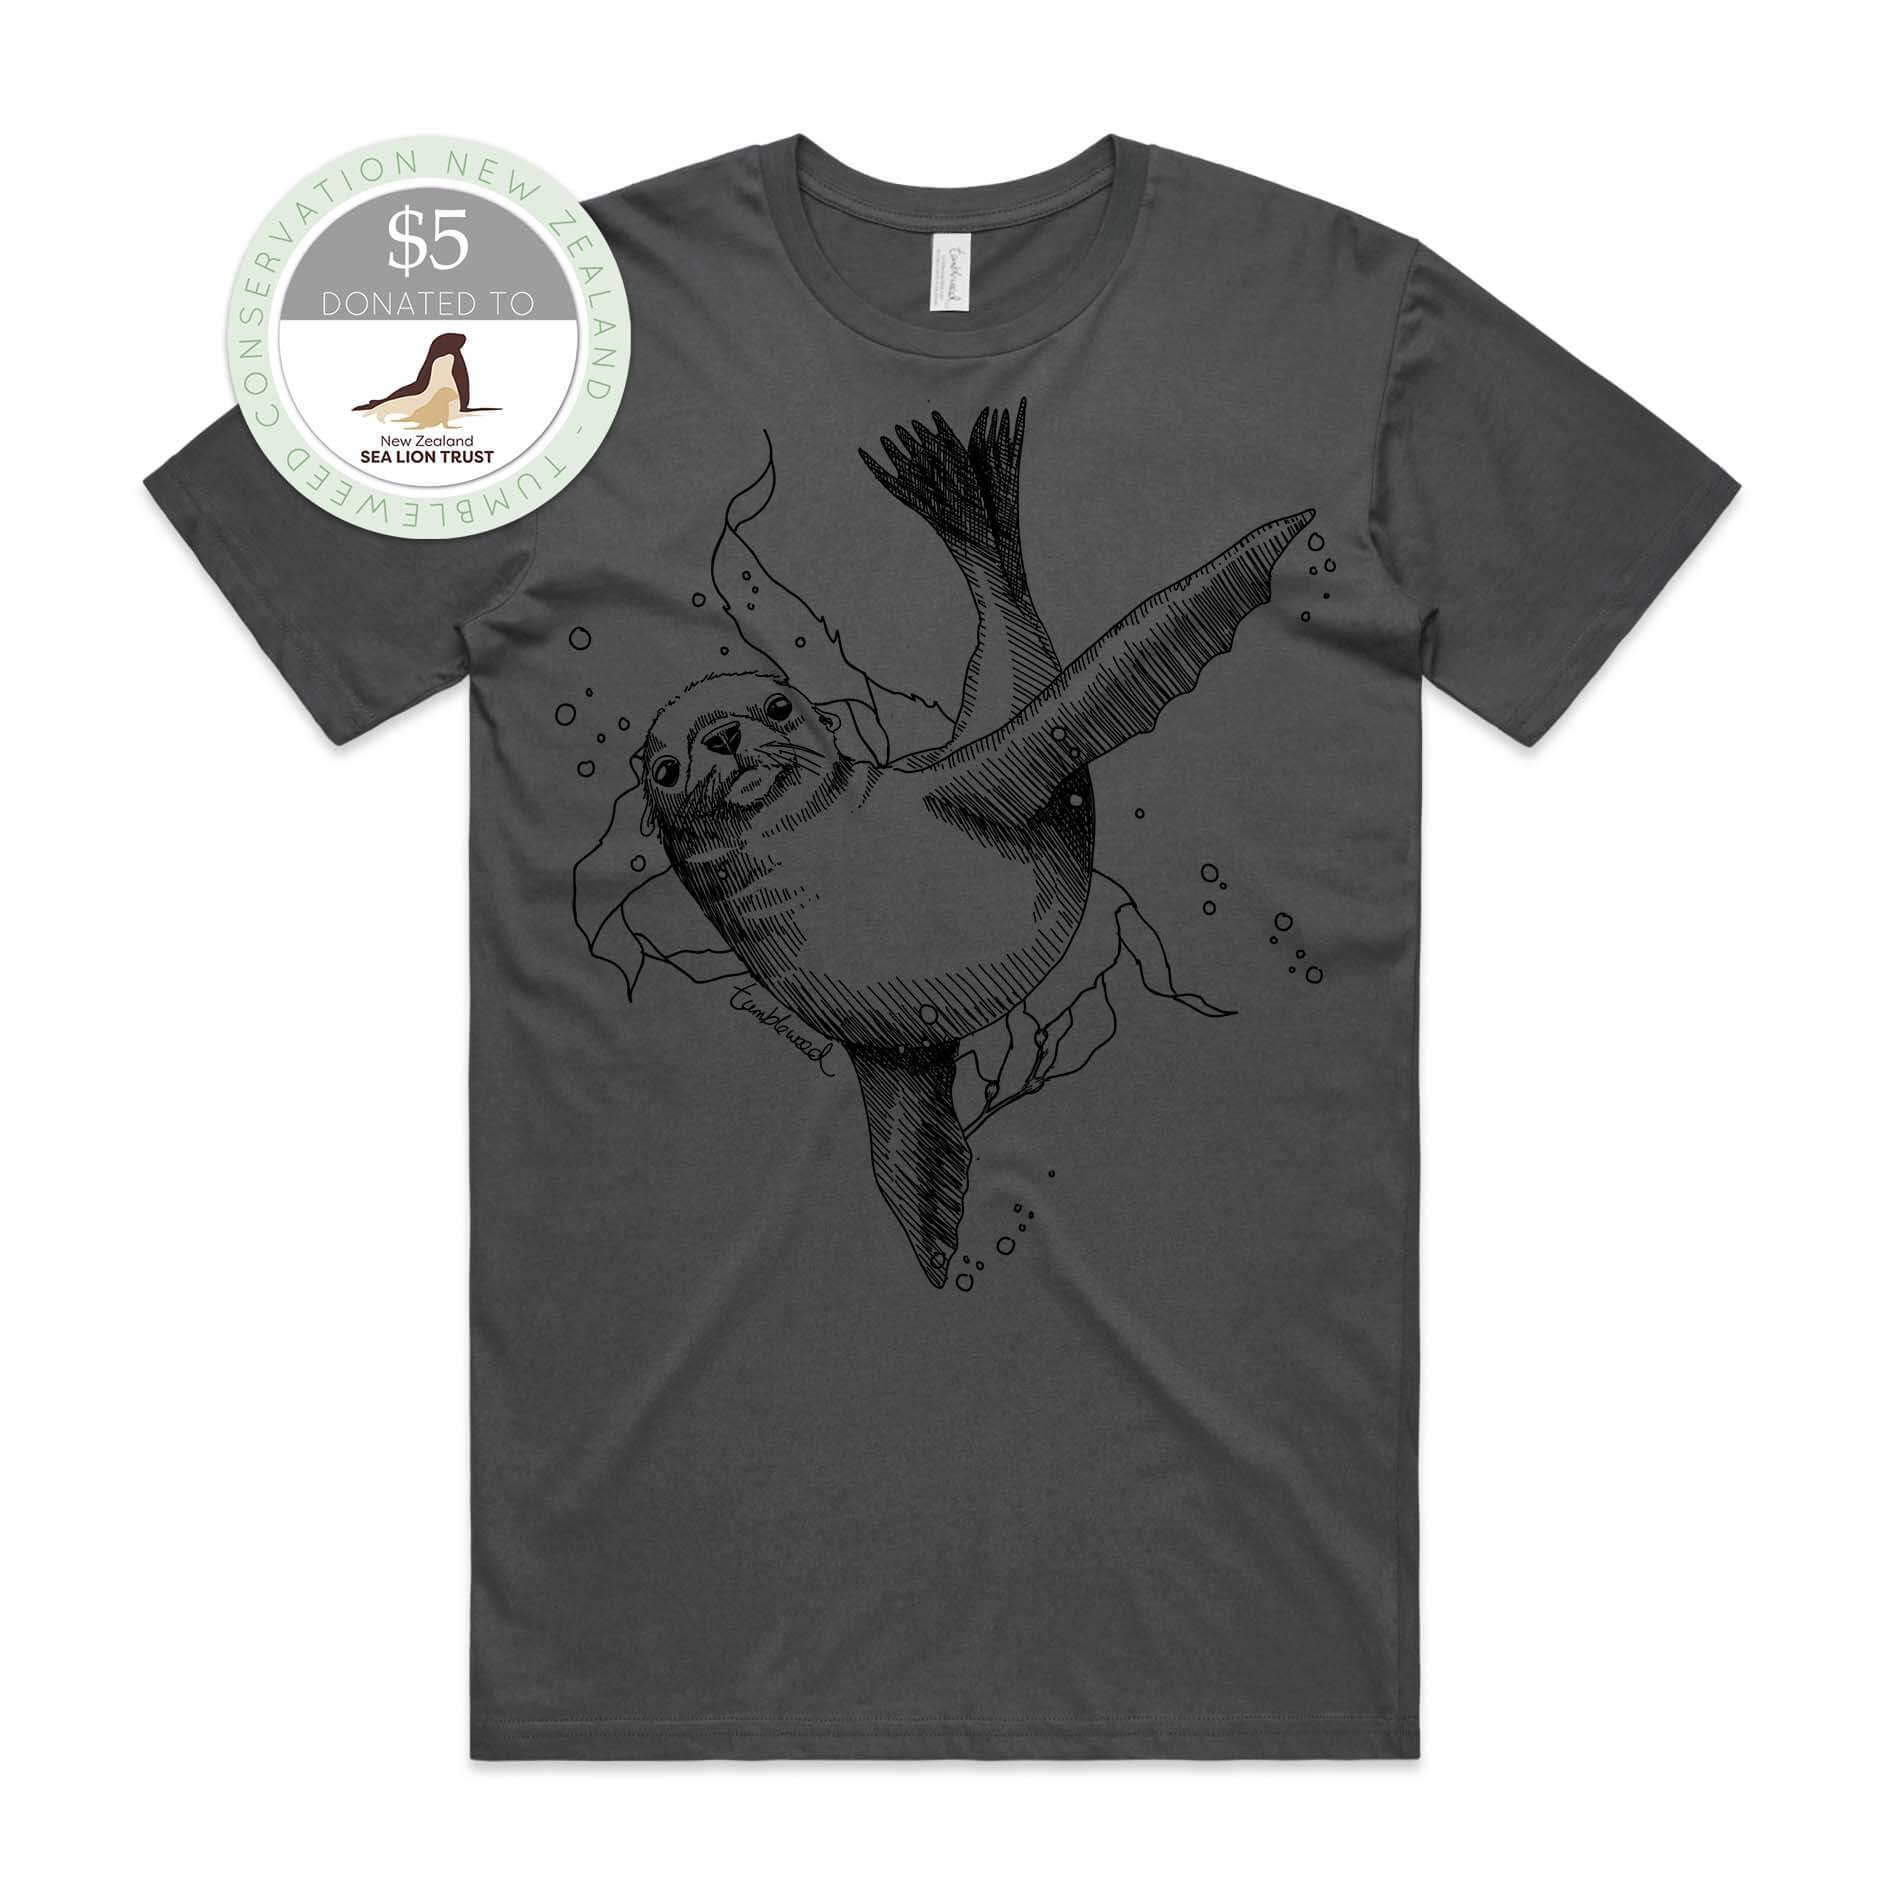 White, male t-shirt featuring a screen printed New Zealand sea lion design.